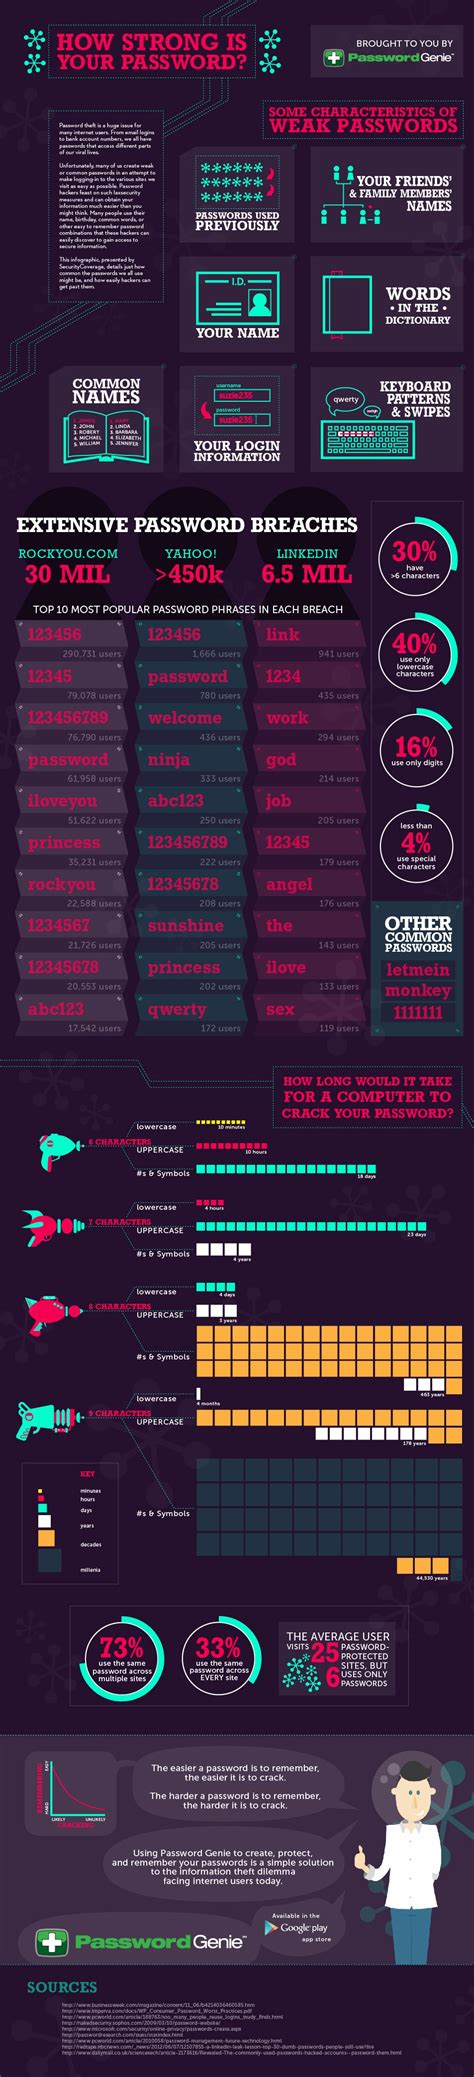 Password Strength How Strong Is Your Password Infographic